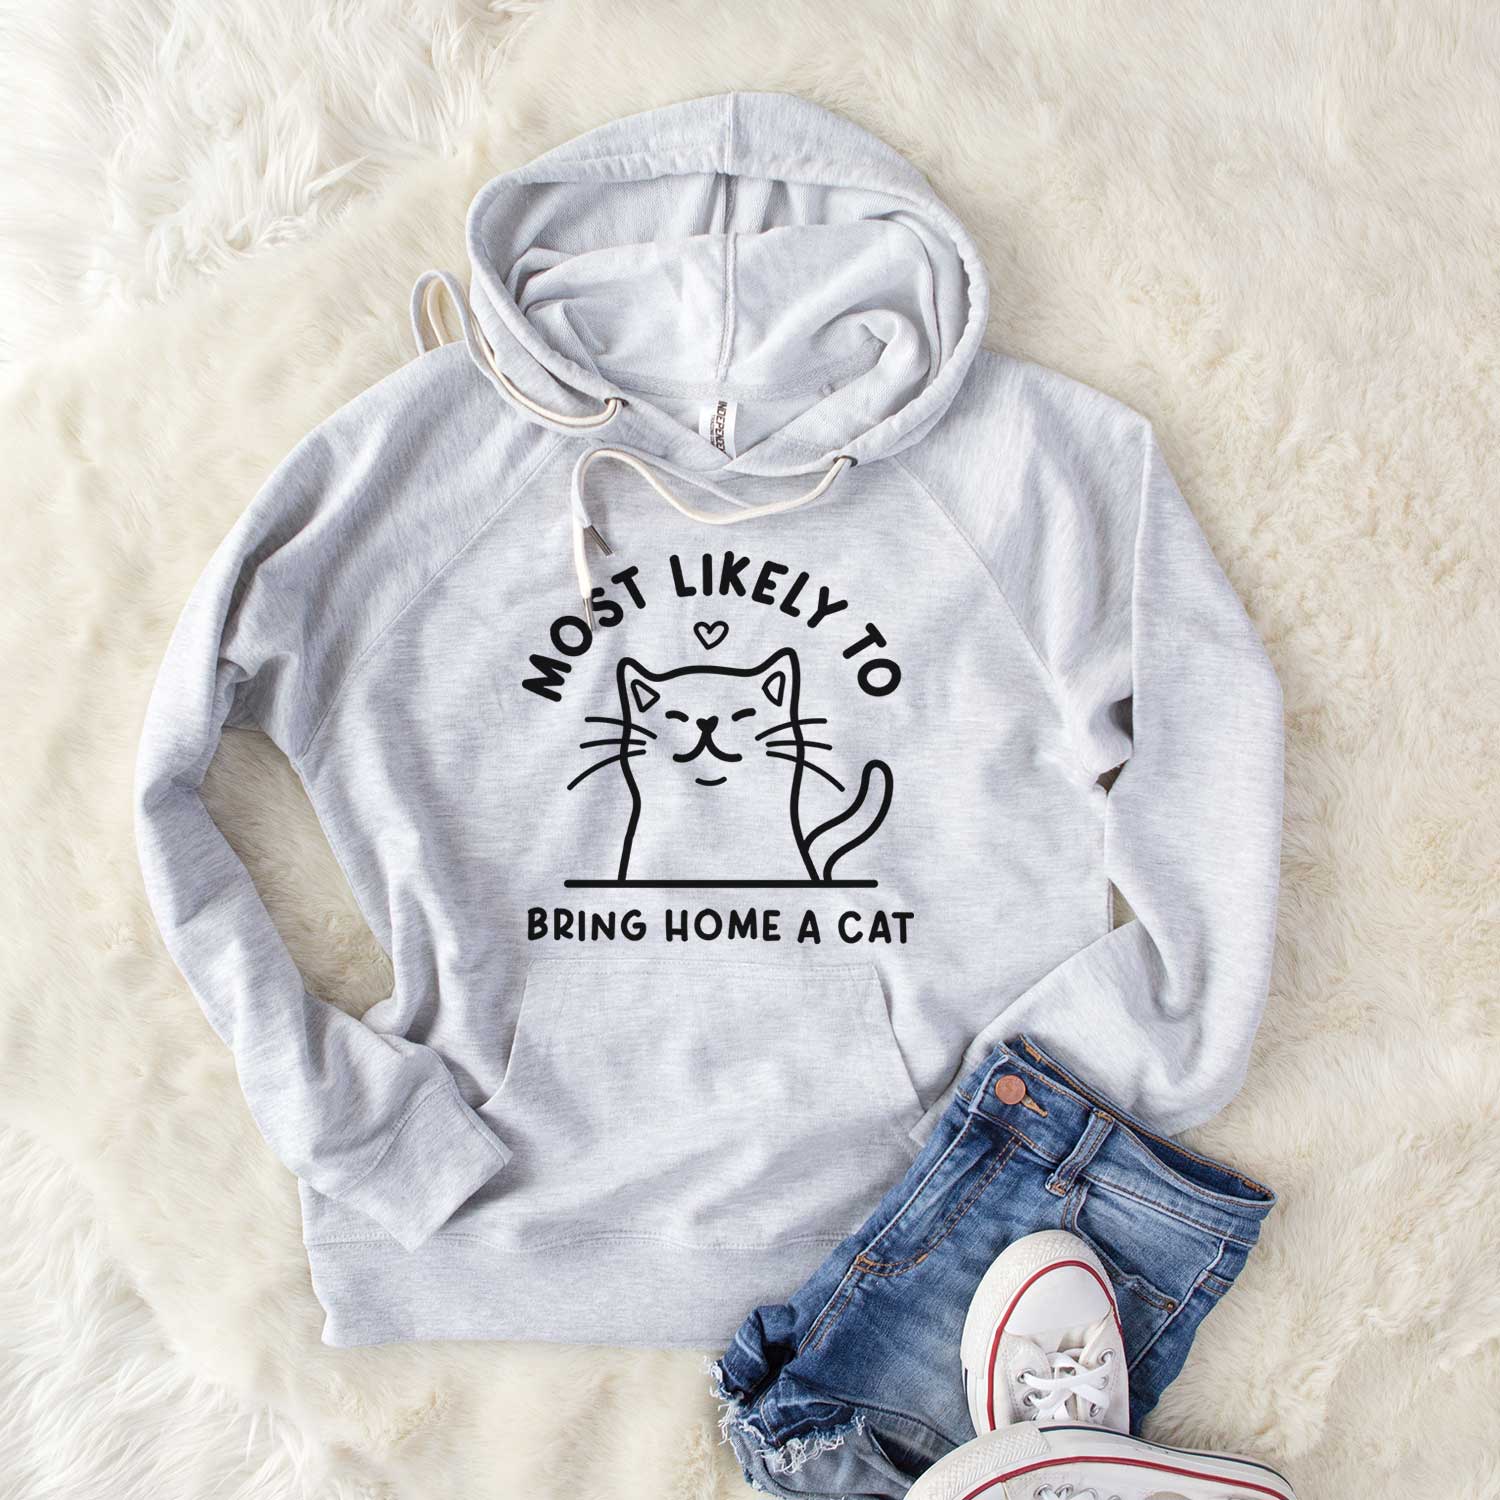 Most Likely to Bring Home a Cat Hoodie